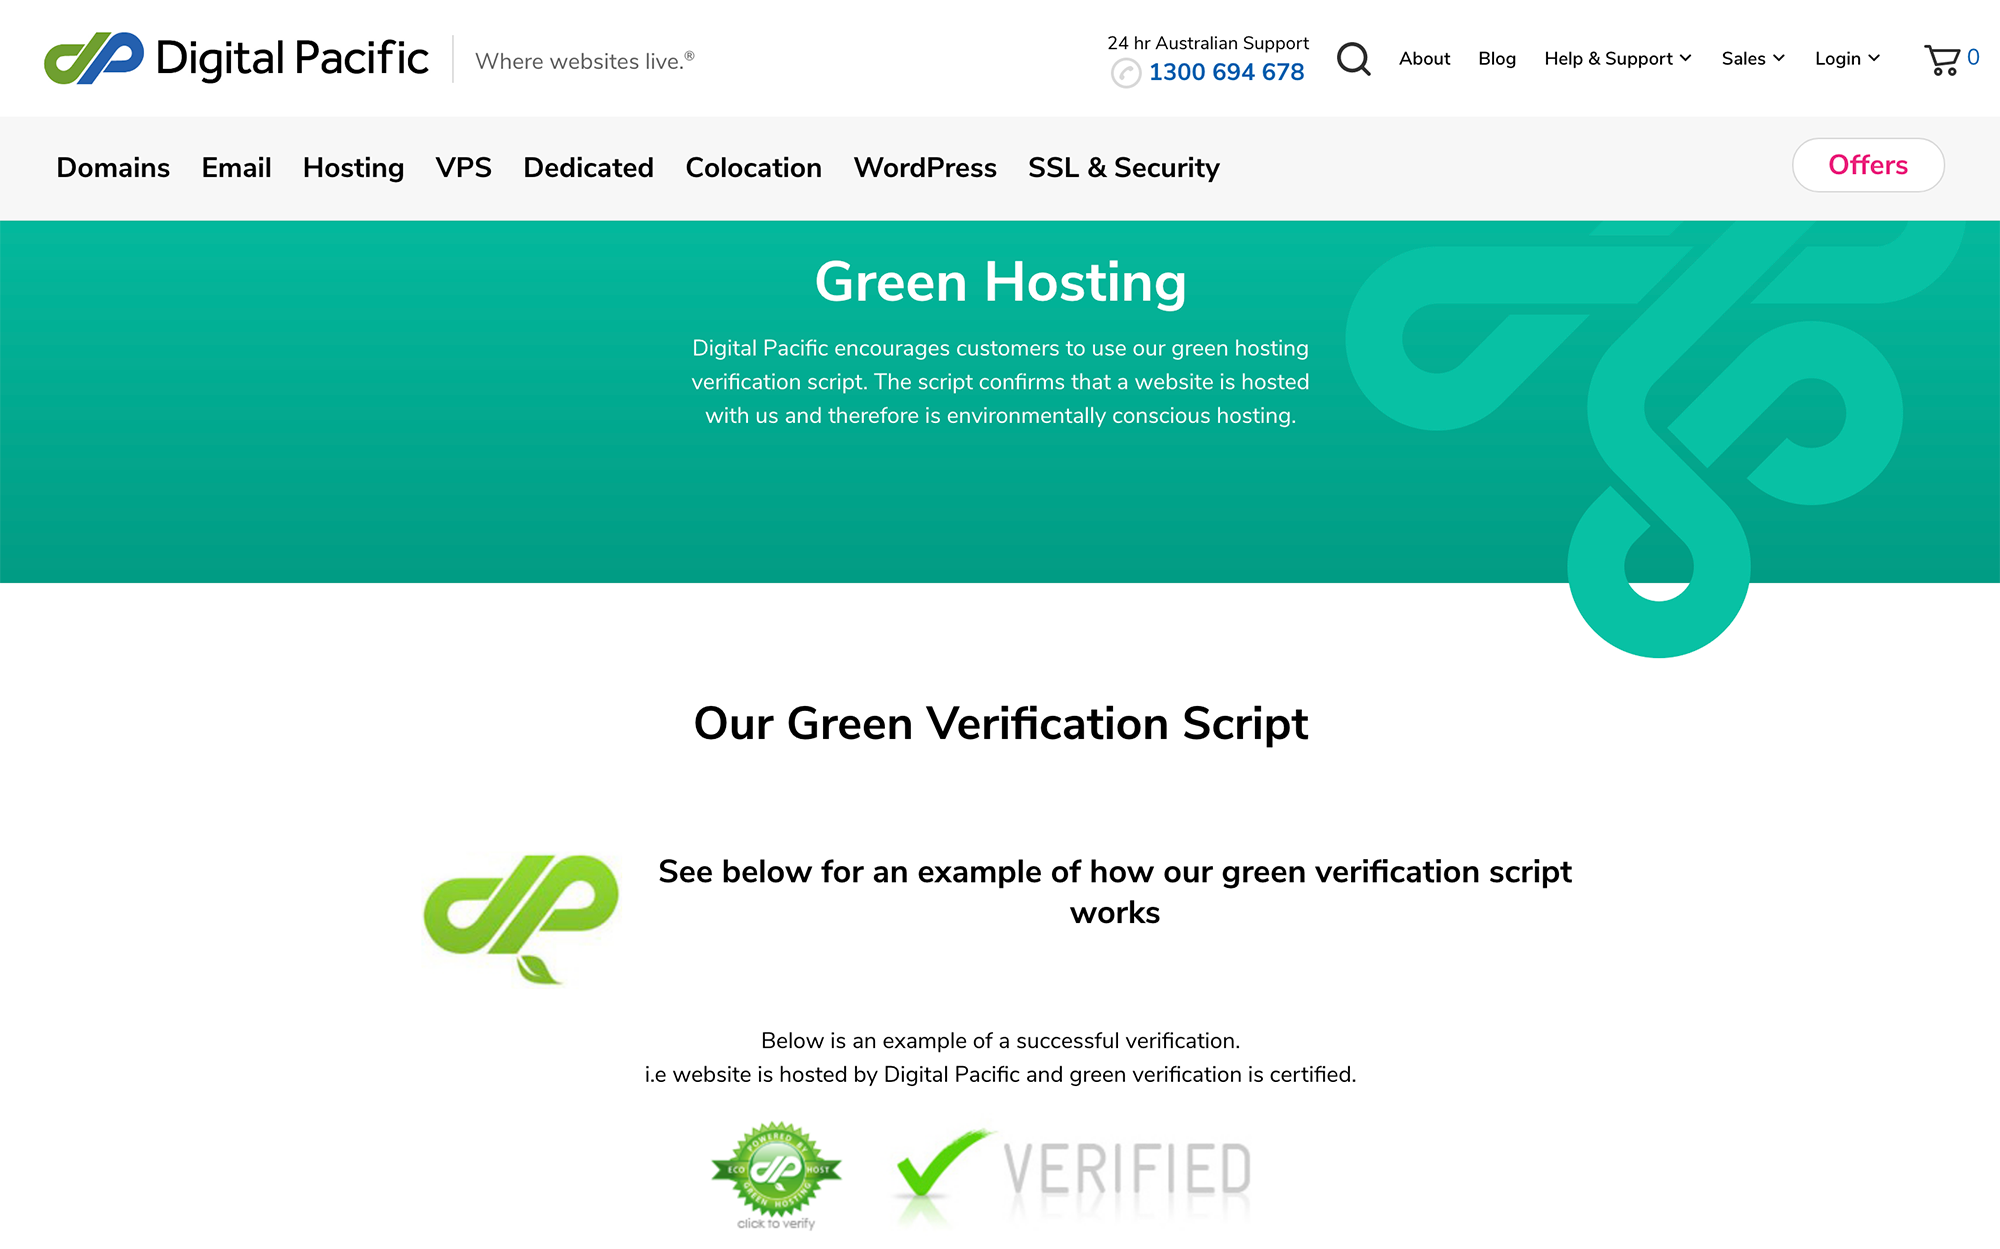 Image of Digital Pacific green hosting web page